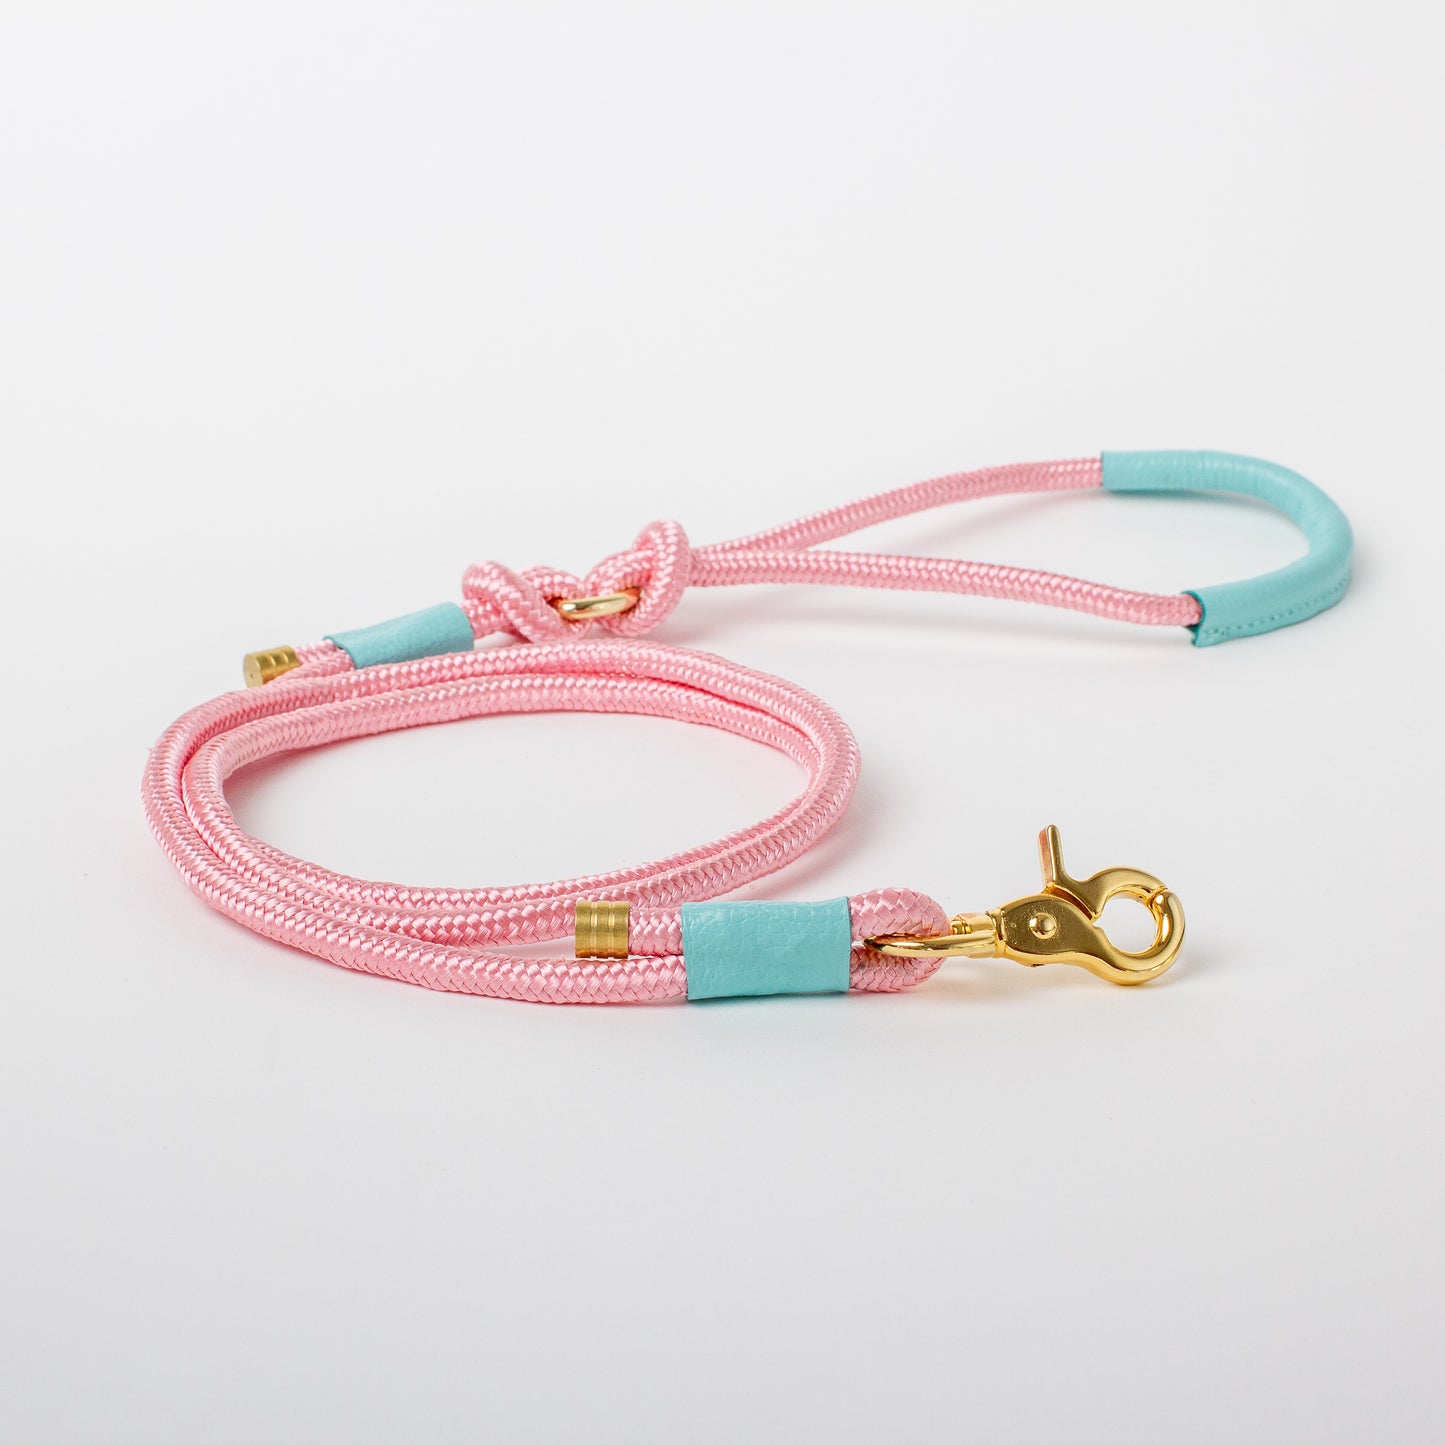 Willow Walks marine rope lead with leather details in pink and aqua